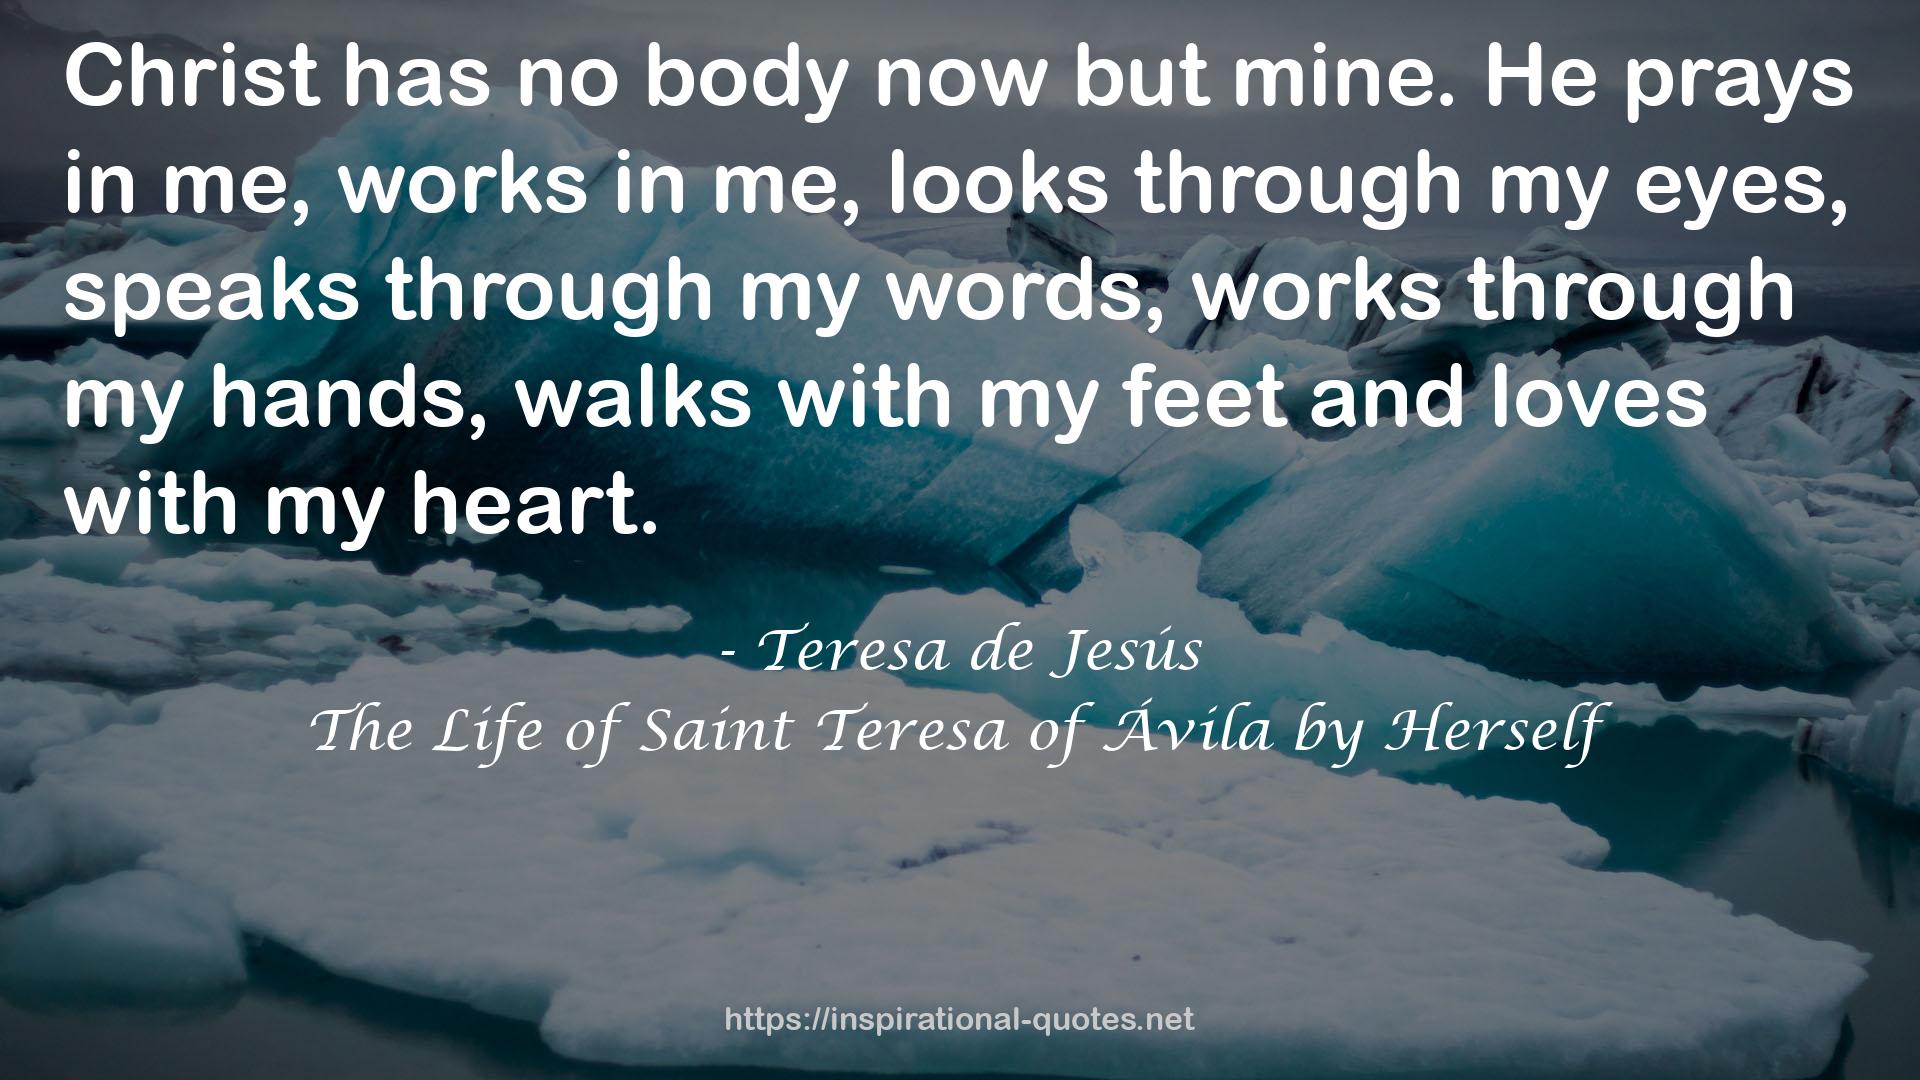 The Life of Saint Teresa of Ávila by Herself QUOTES